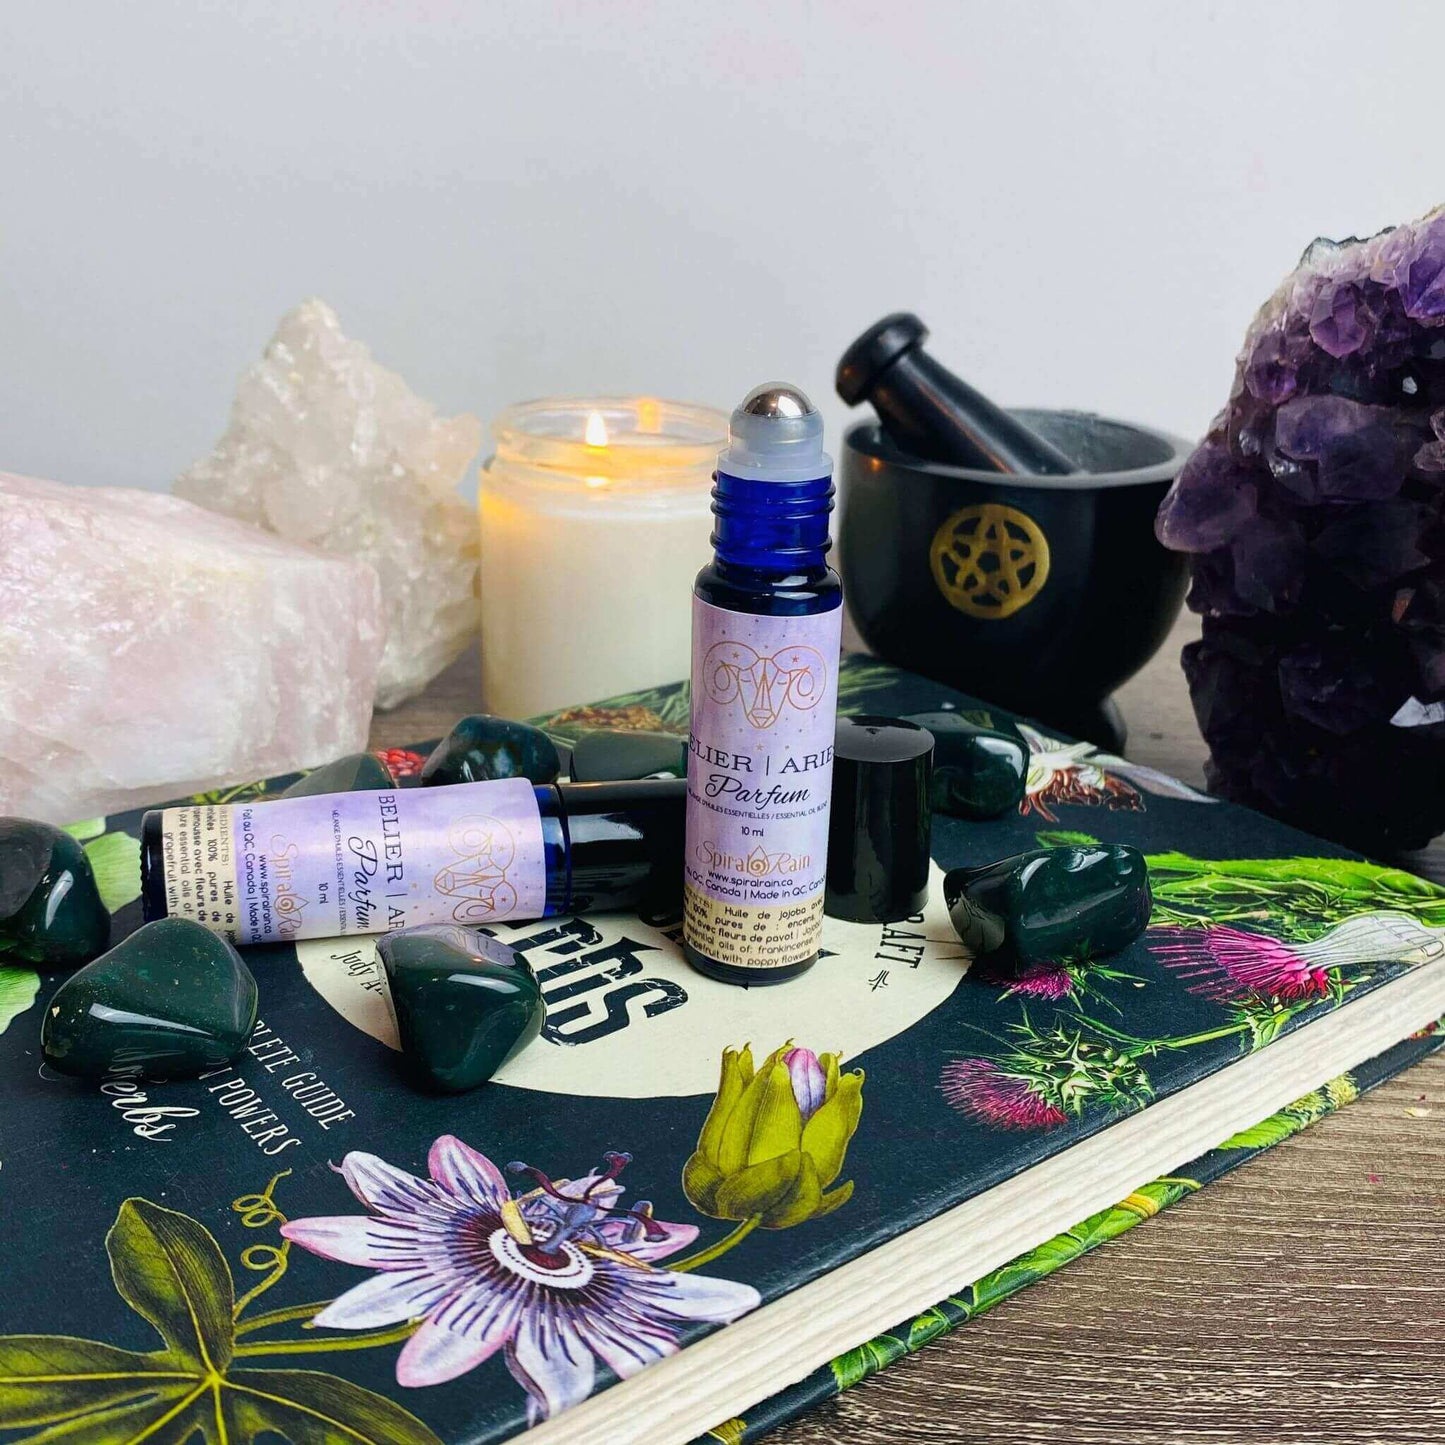 Aries (Mar 21 - Apr 19) Box at $85 only from Spiral Rain